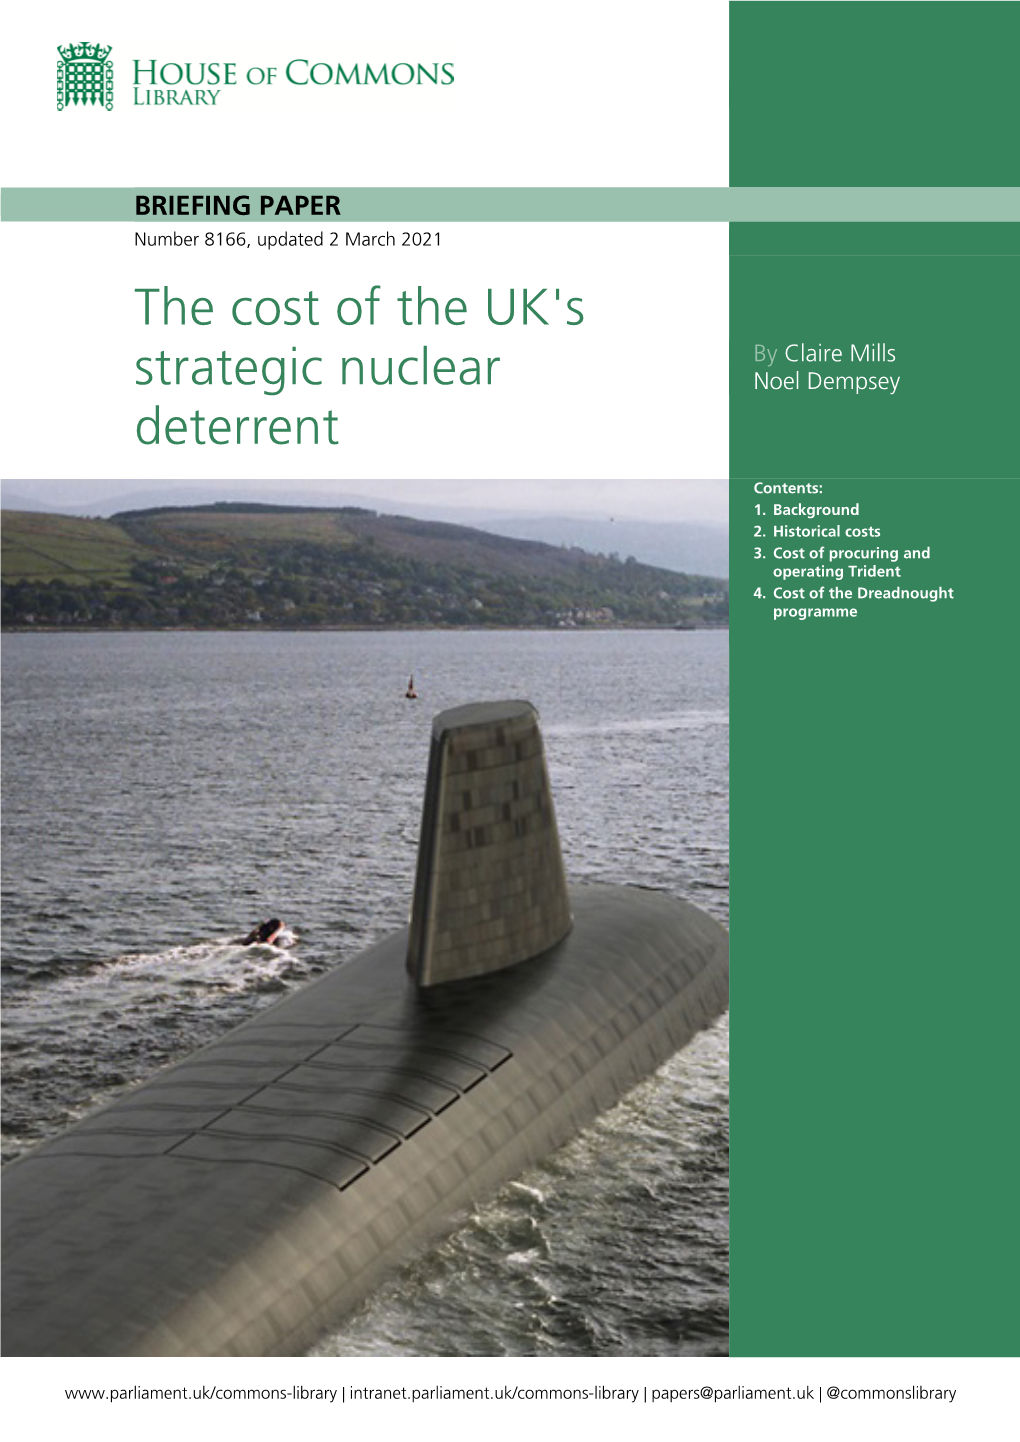 The Cost of the UK's Strategic Nuclear Deterrent